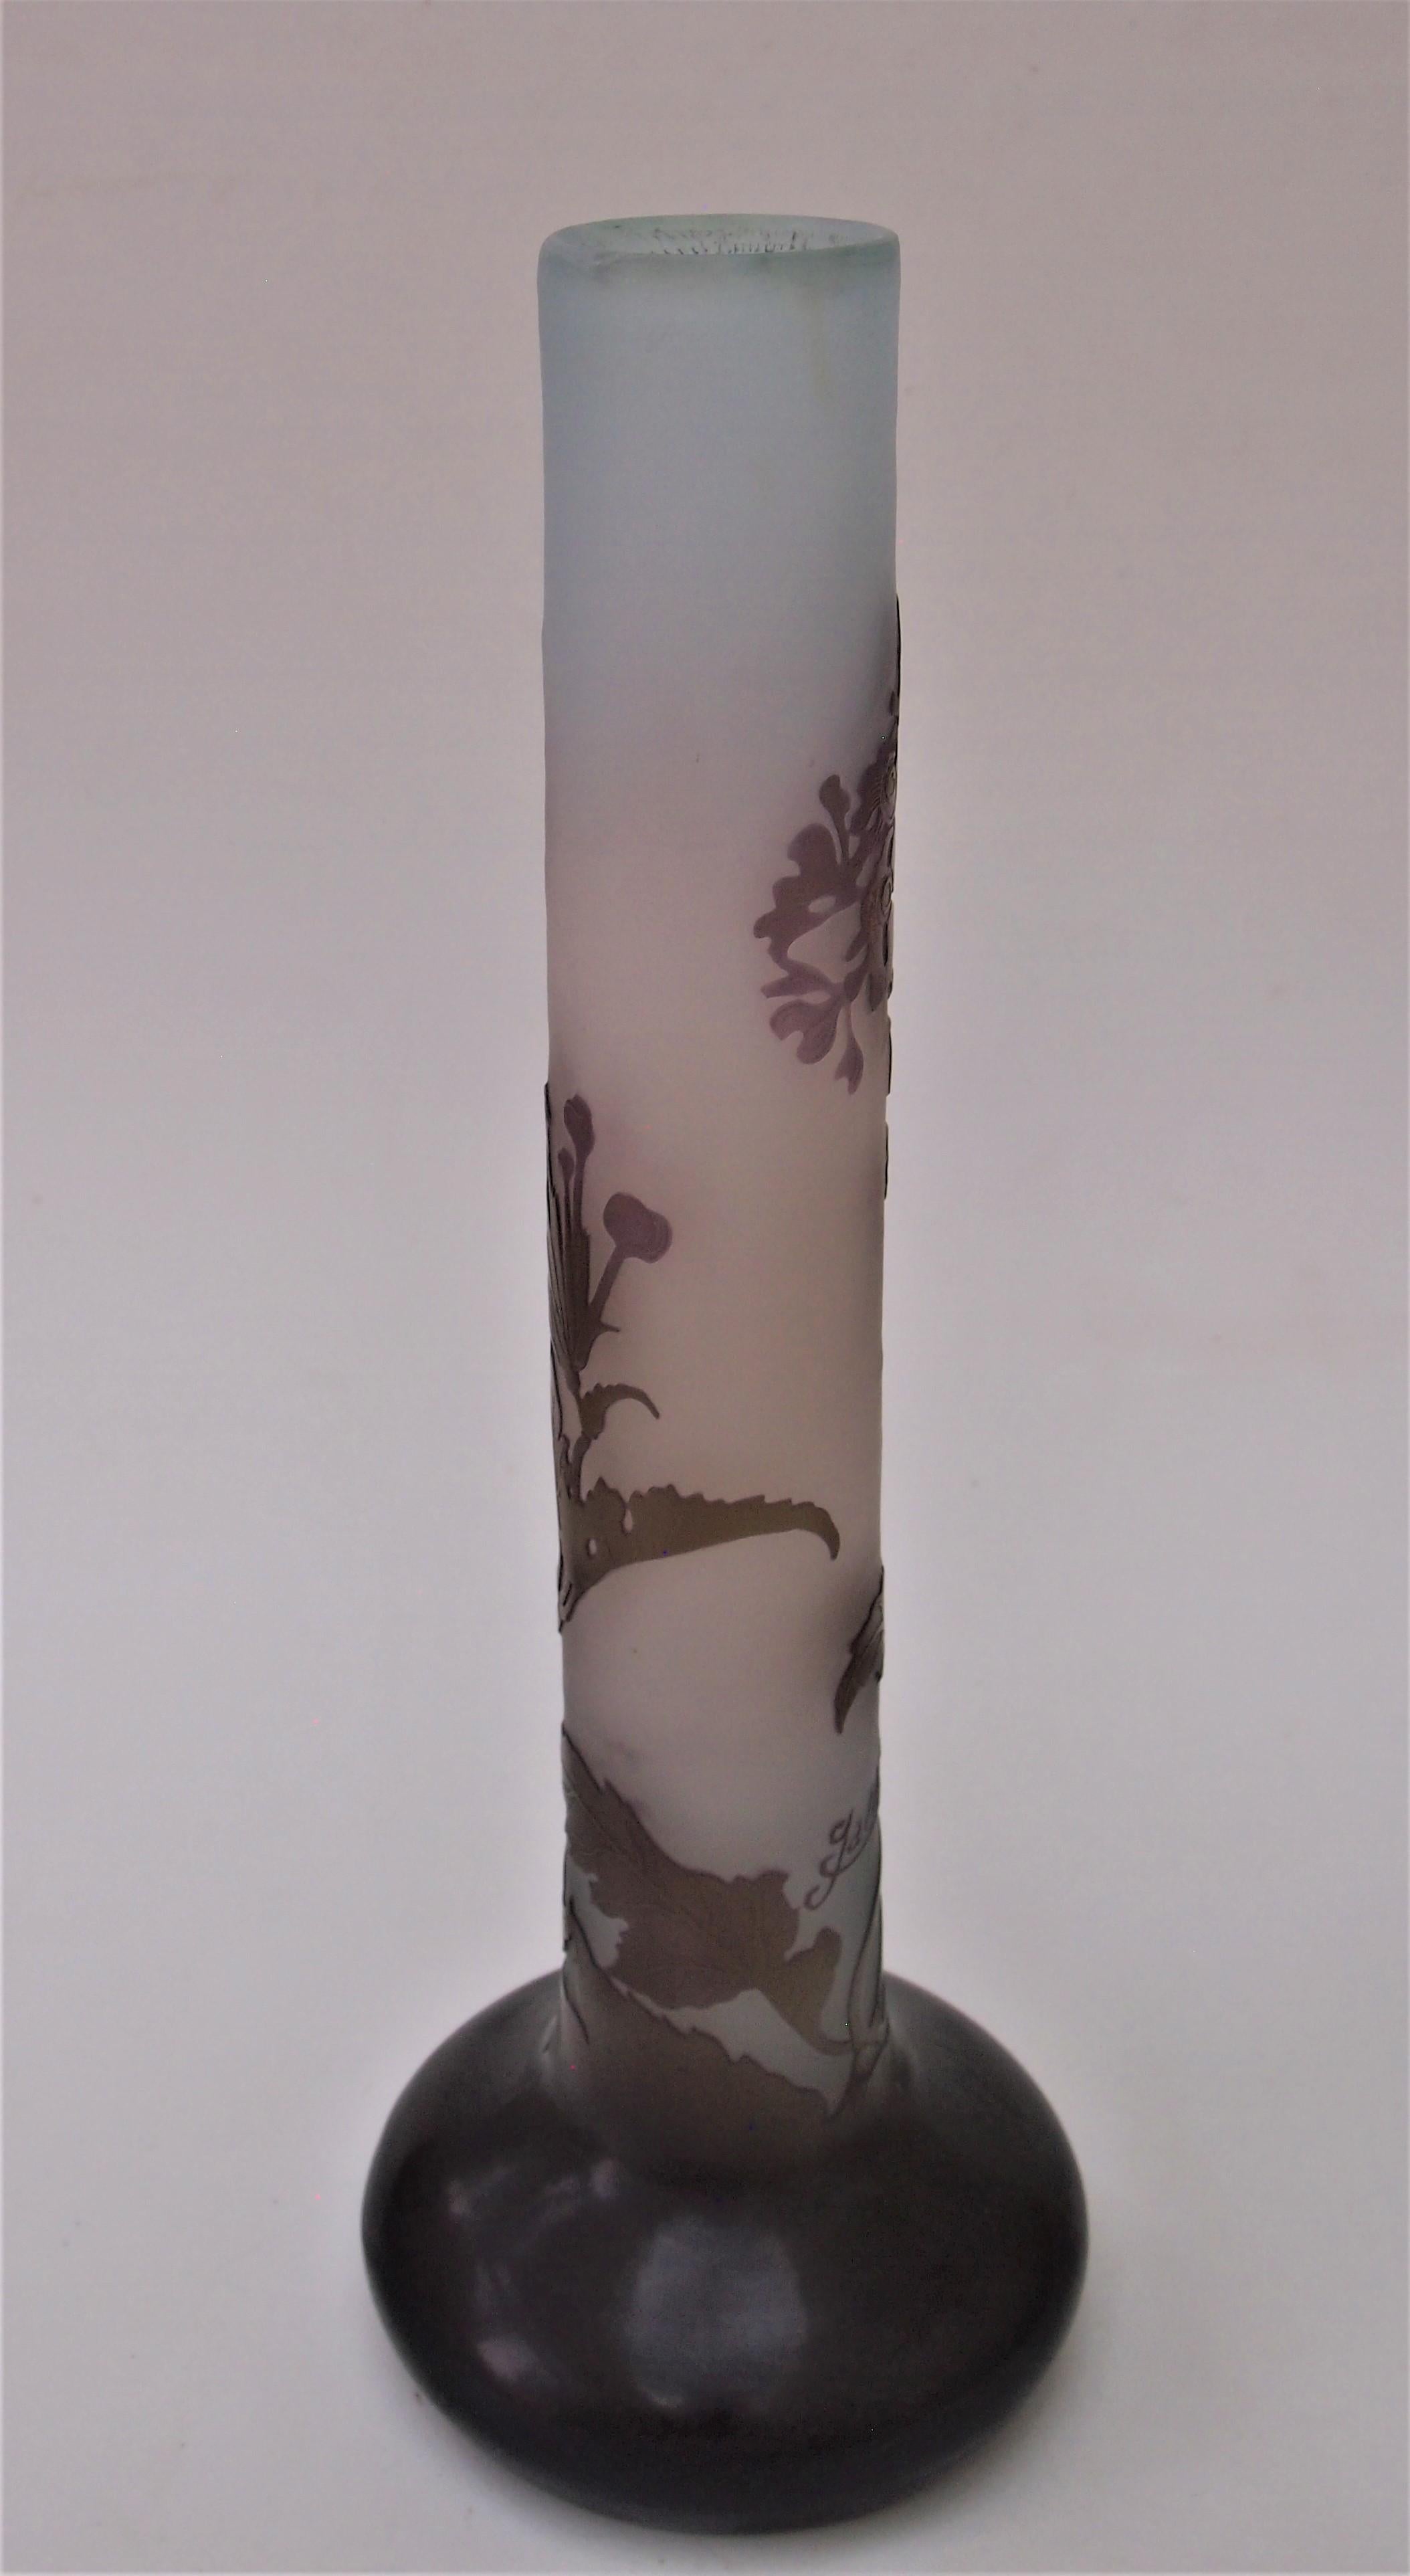 Early 20th Century French Art Nouveau Emile Galle Cameo Glass Vervain Blossom Vase c1908 For Sale